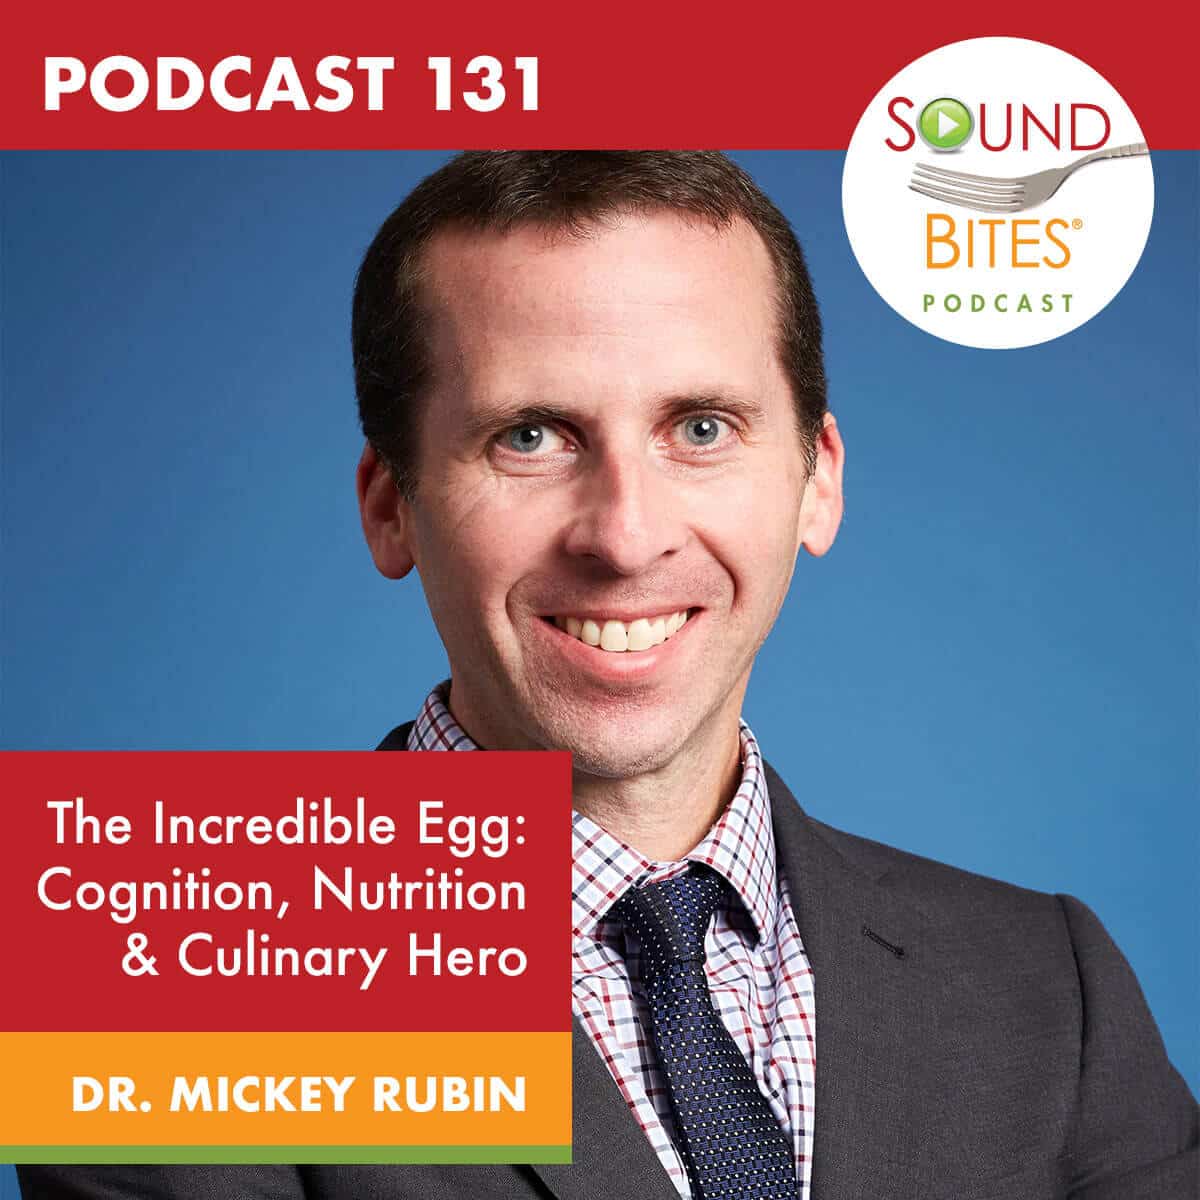 The Incredible Egg: Cognition, Nutrition & Culinary Hero – Dr. Mickey Rubin